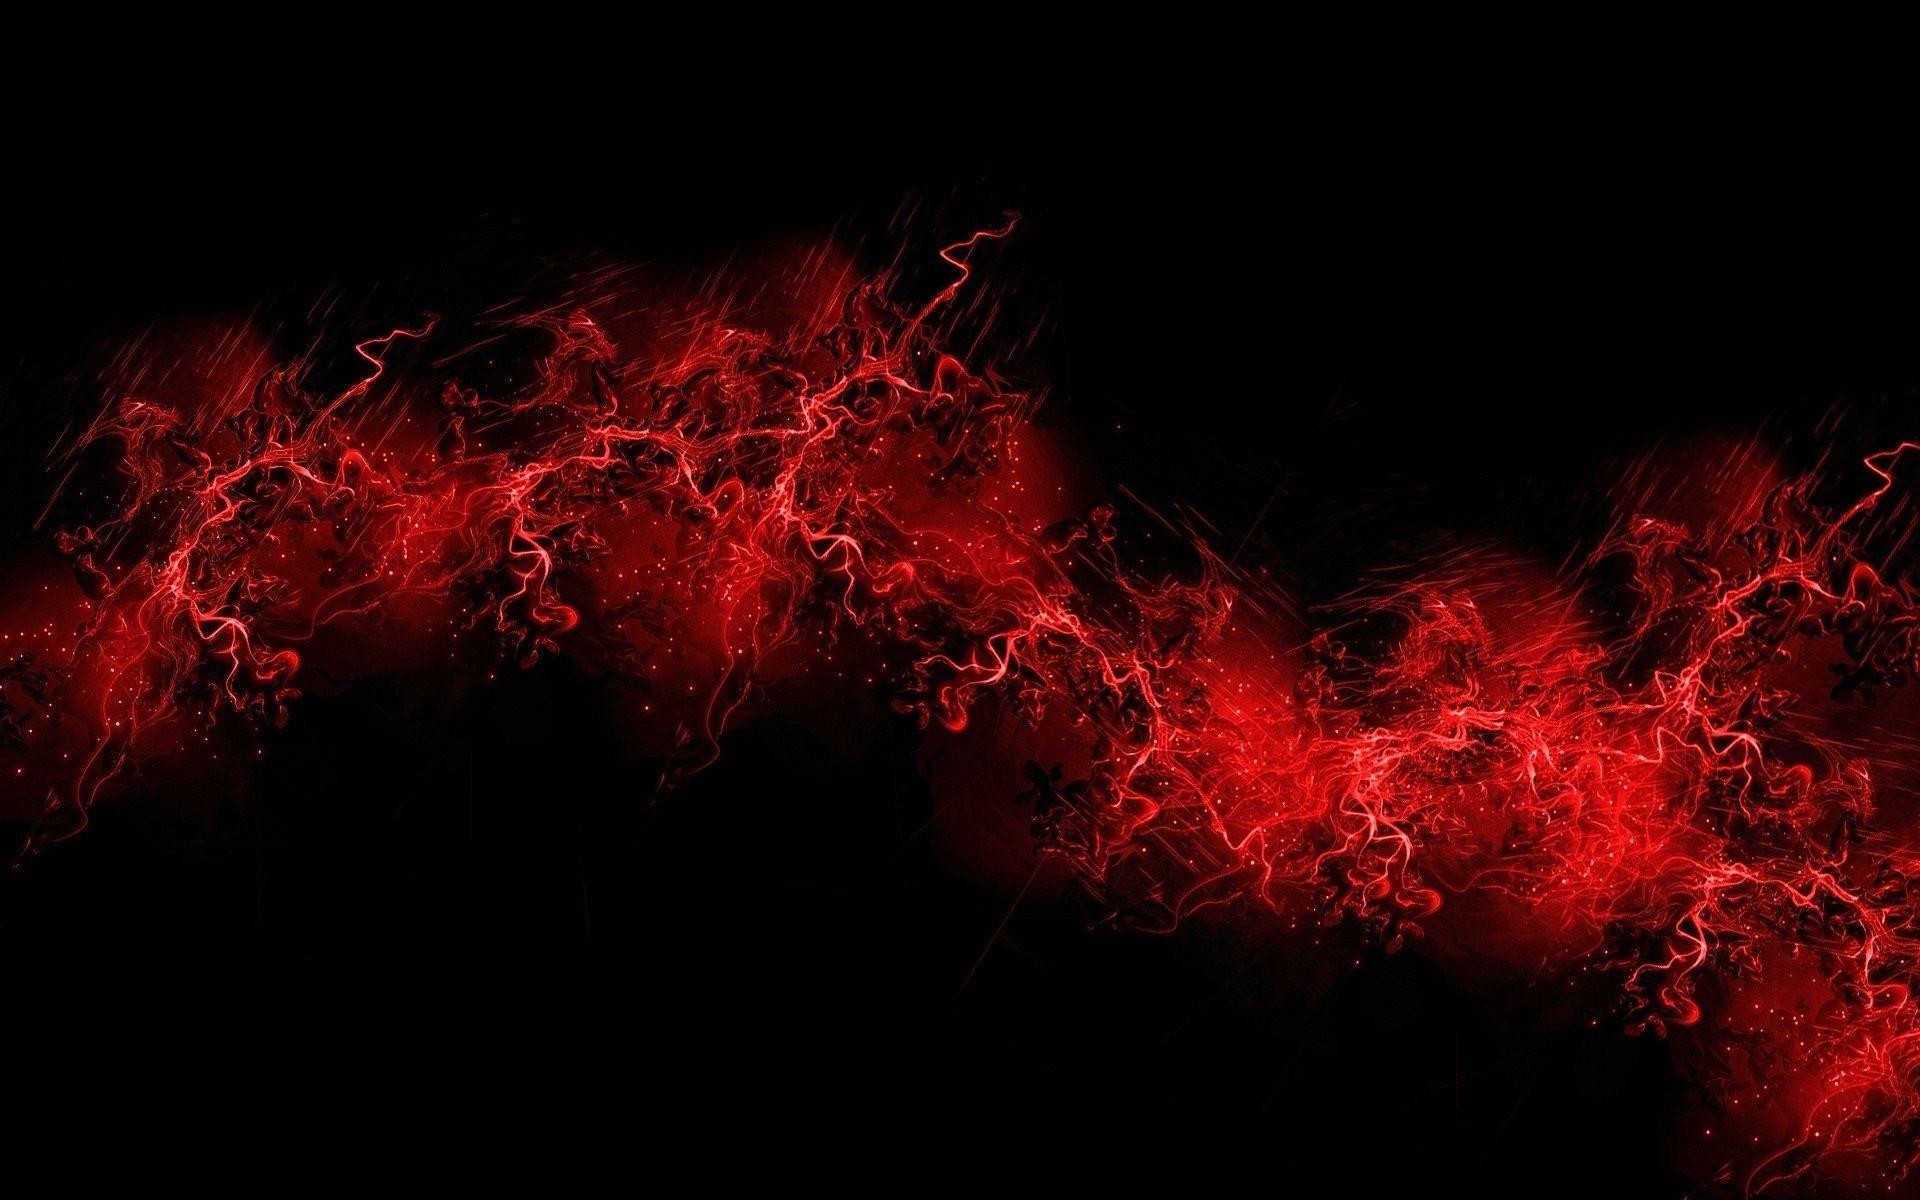 1920x1200 Dark Red Abstract Backgrounds Hd Widescreen 11 HD Wallpapers .